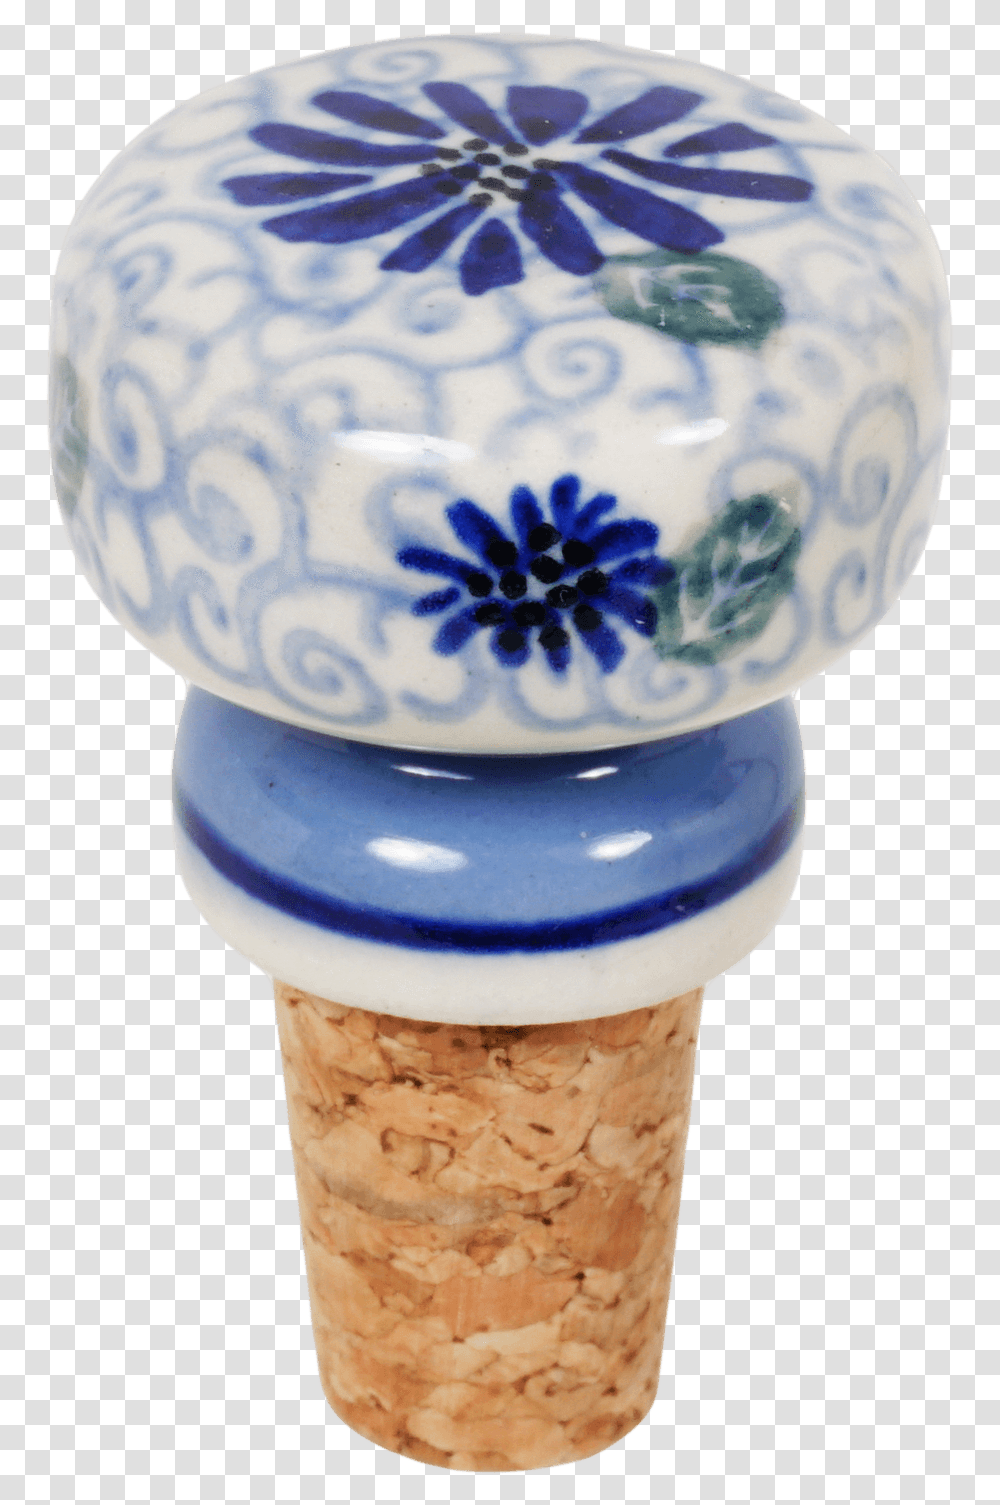 Class Lazyload Lazyload Mirage Cloudzoom Featured Image Blue And White Porcelain, Milk, Beverage, Drink, Cork Transparent Png